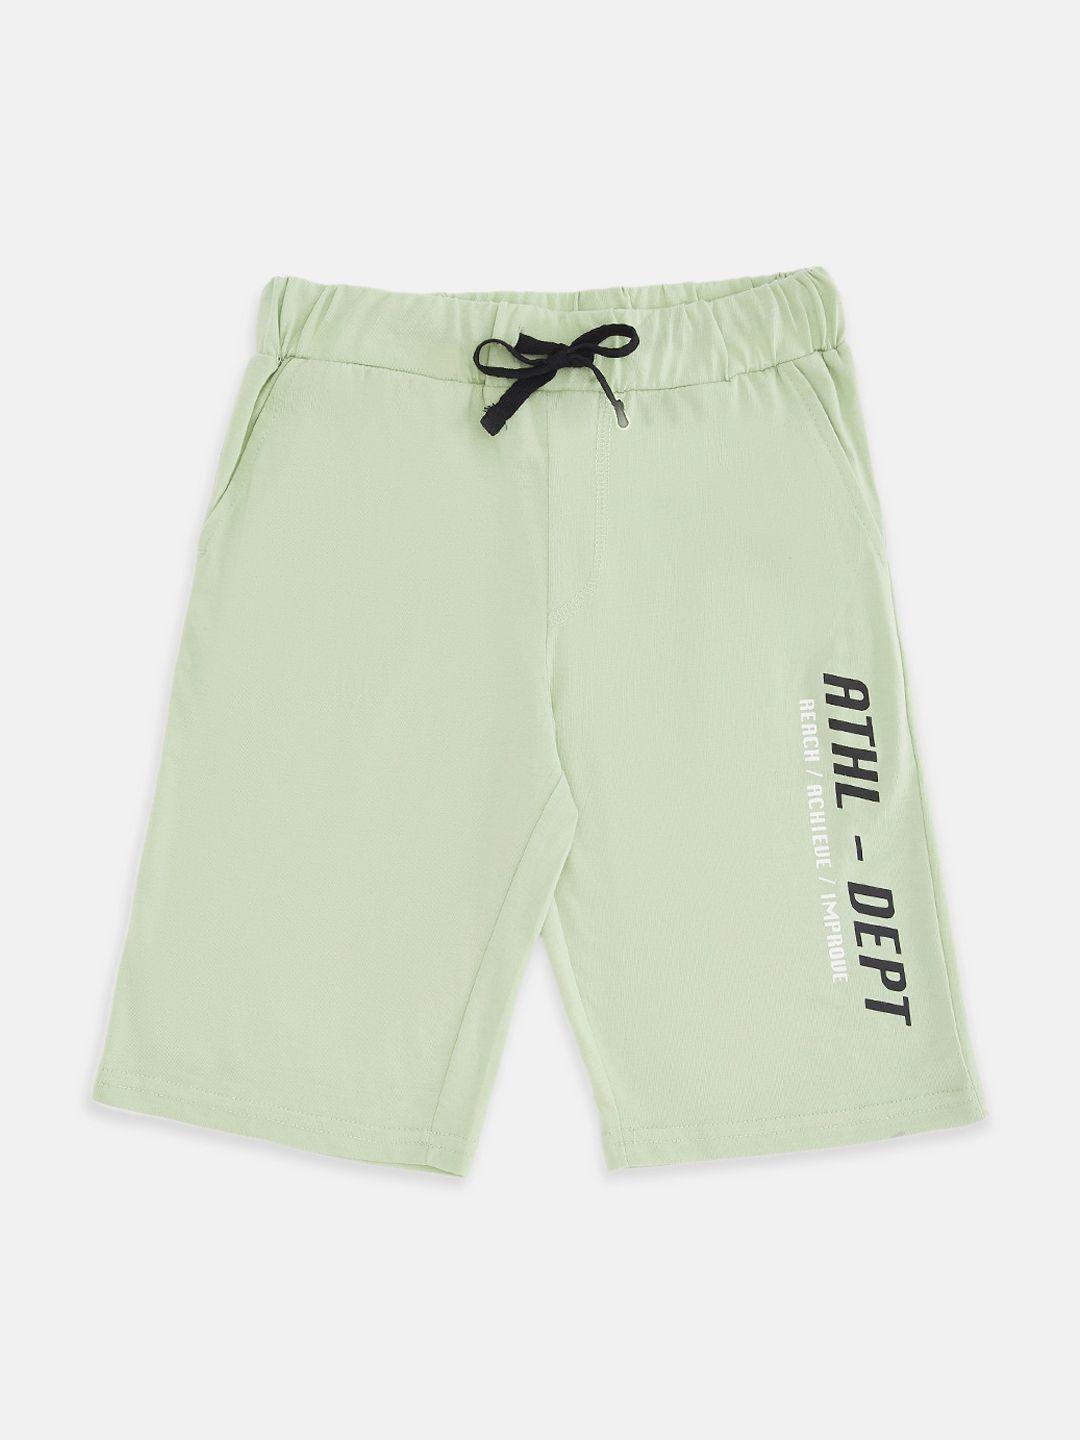 pantaloons-junior-boys-olive-green-typography-printed-pure-cotton-shorts